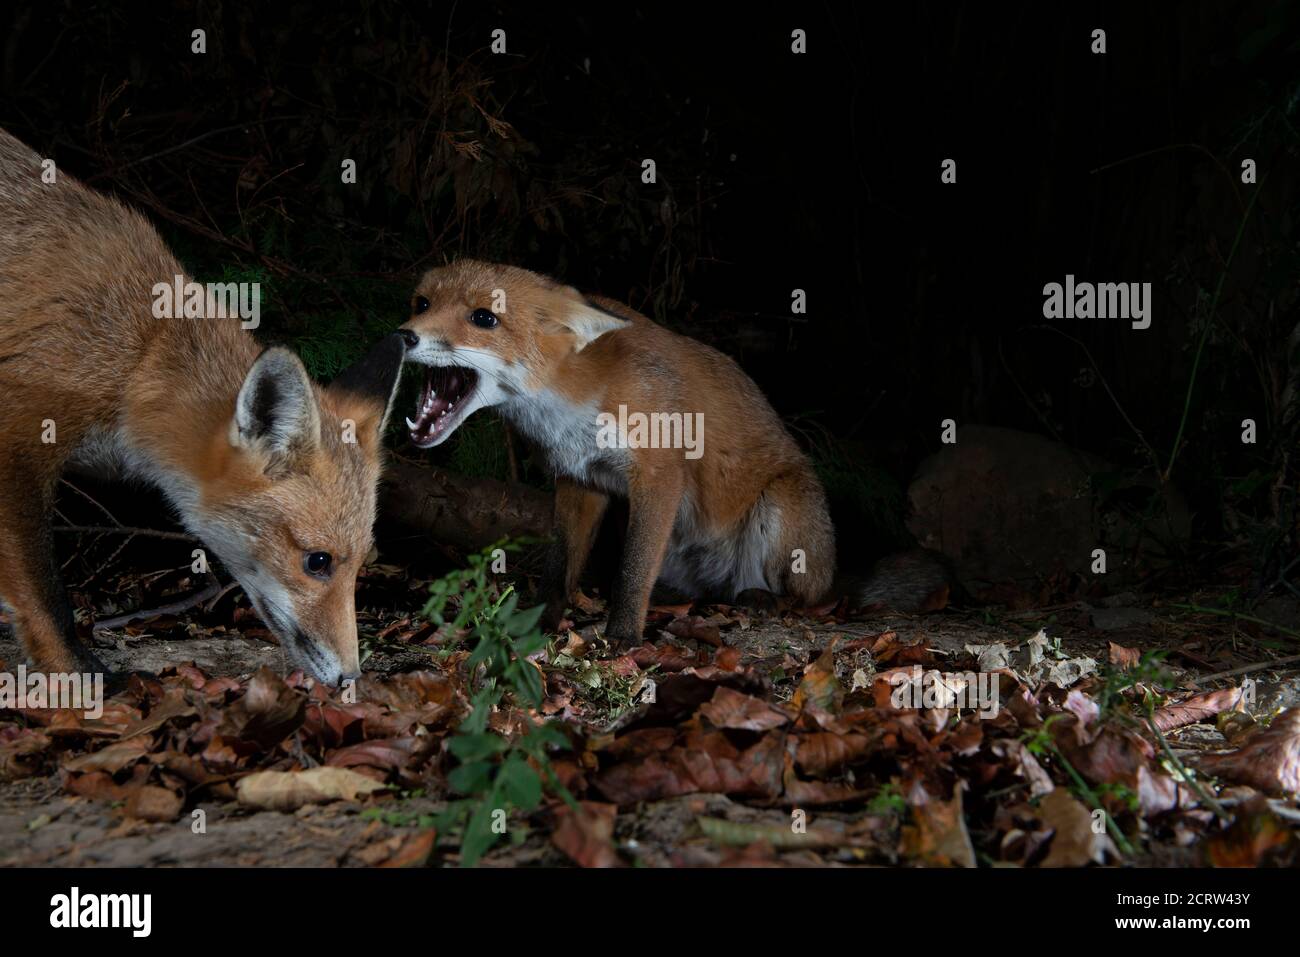 Foxes at night one eating and one with mouth open protesting Stock Photo